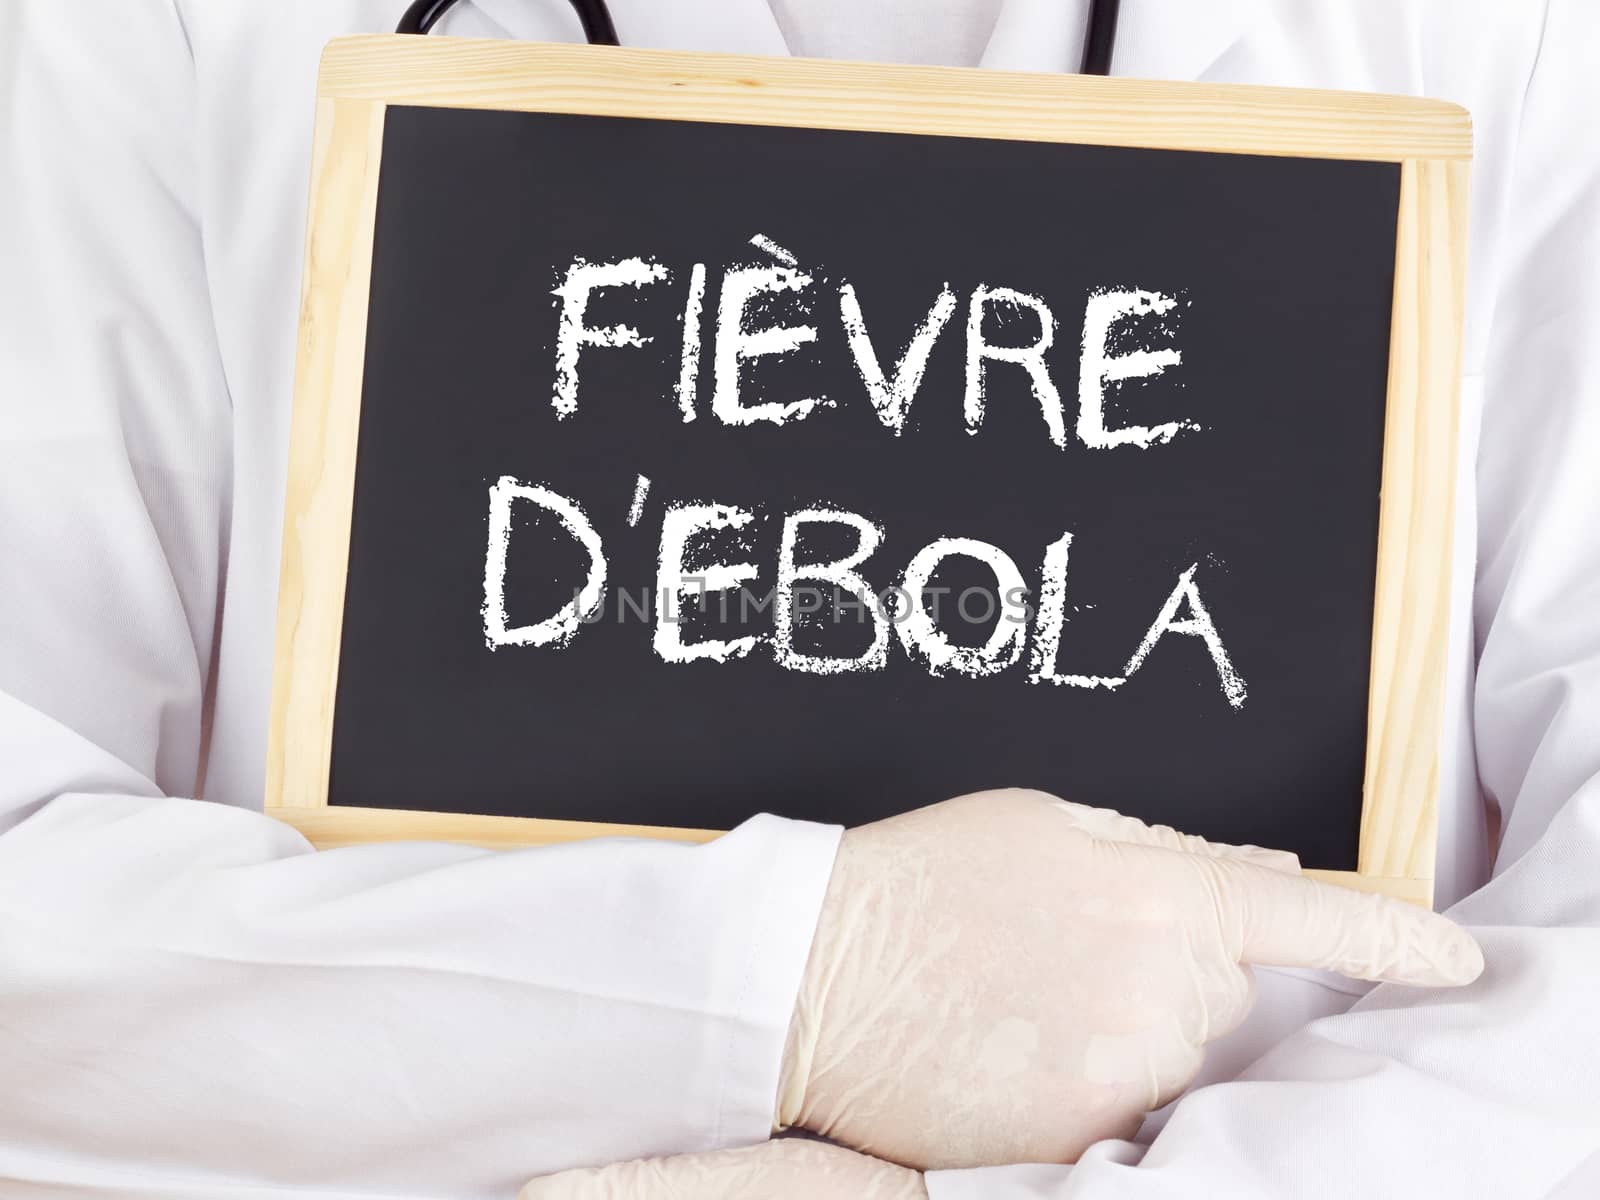 Doctor shows information: Ebola in french language by gwolters